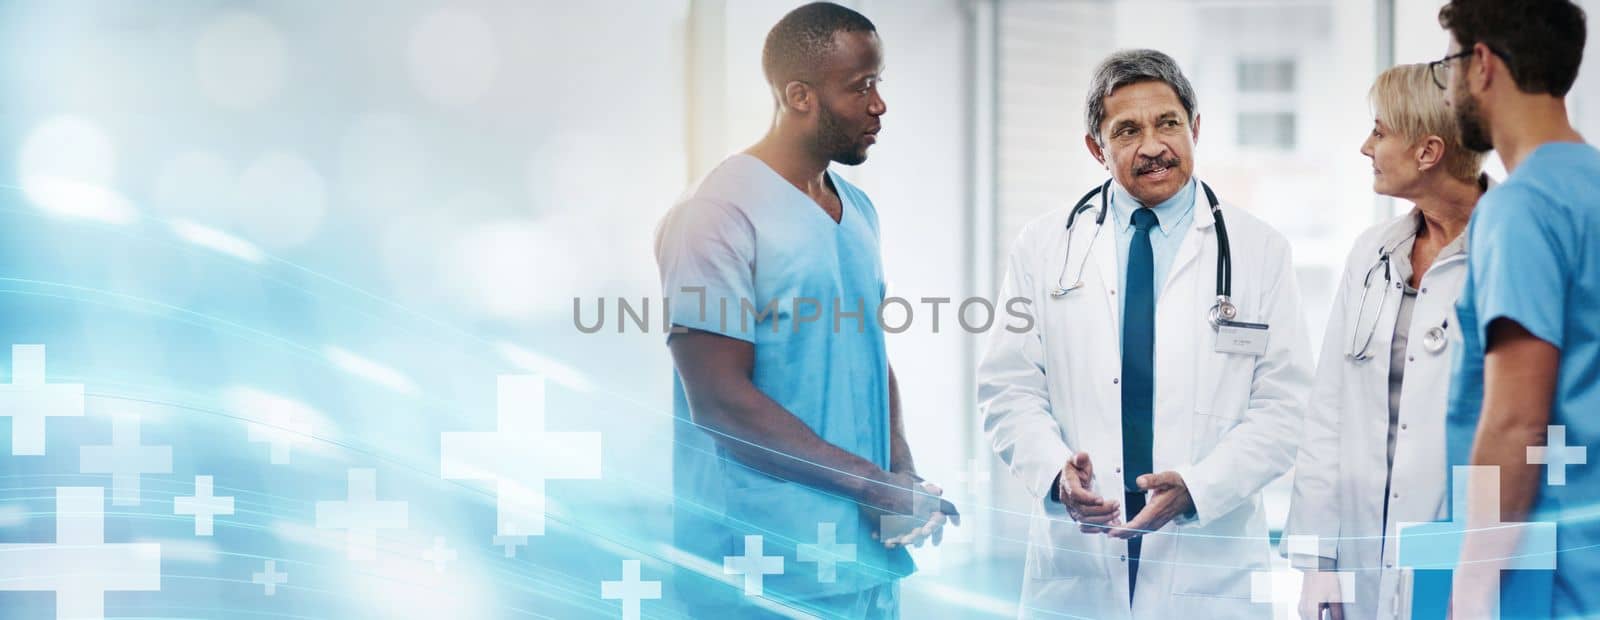 Doctors, nurses and team overlay for healthcare, medical insurance and meeting at hospital. Men and women with teamwork or collaboration talking and planning future medicine, health and wellness by YuriArcurs